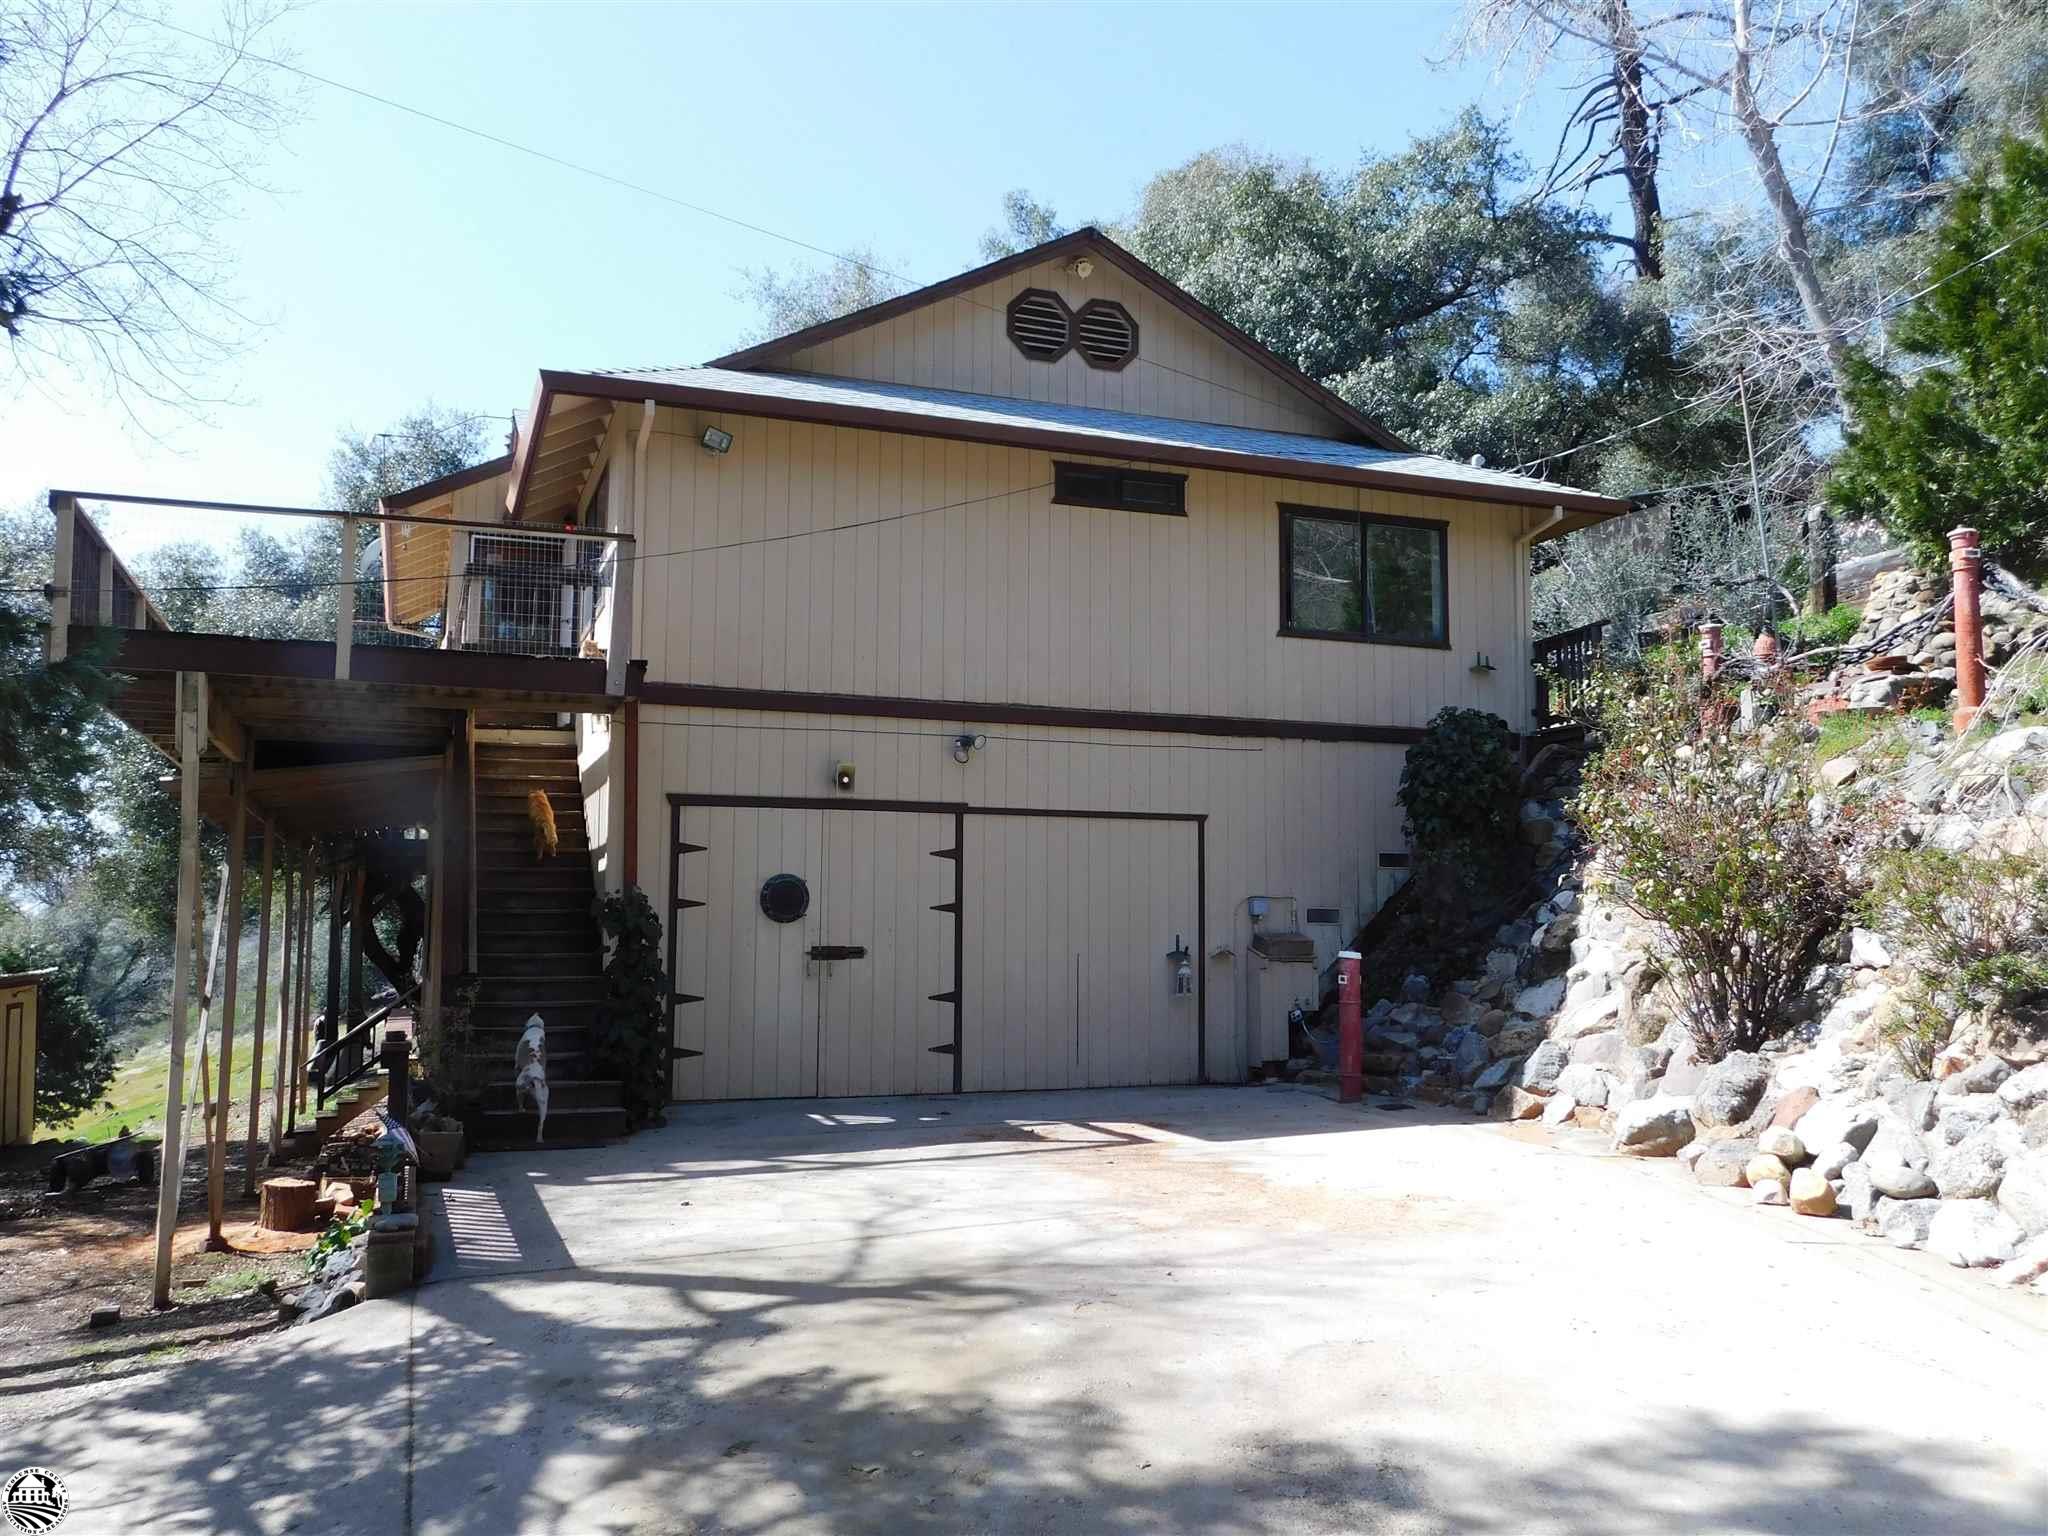 Photo of 21700 Hunts Rd in Sonora, CA